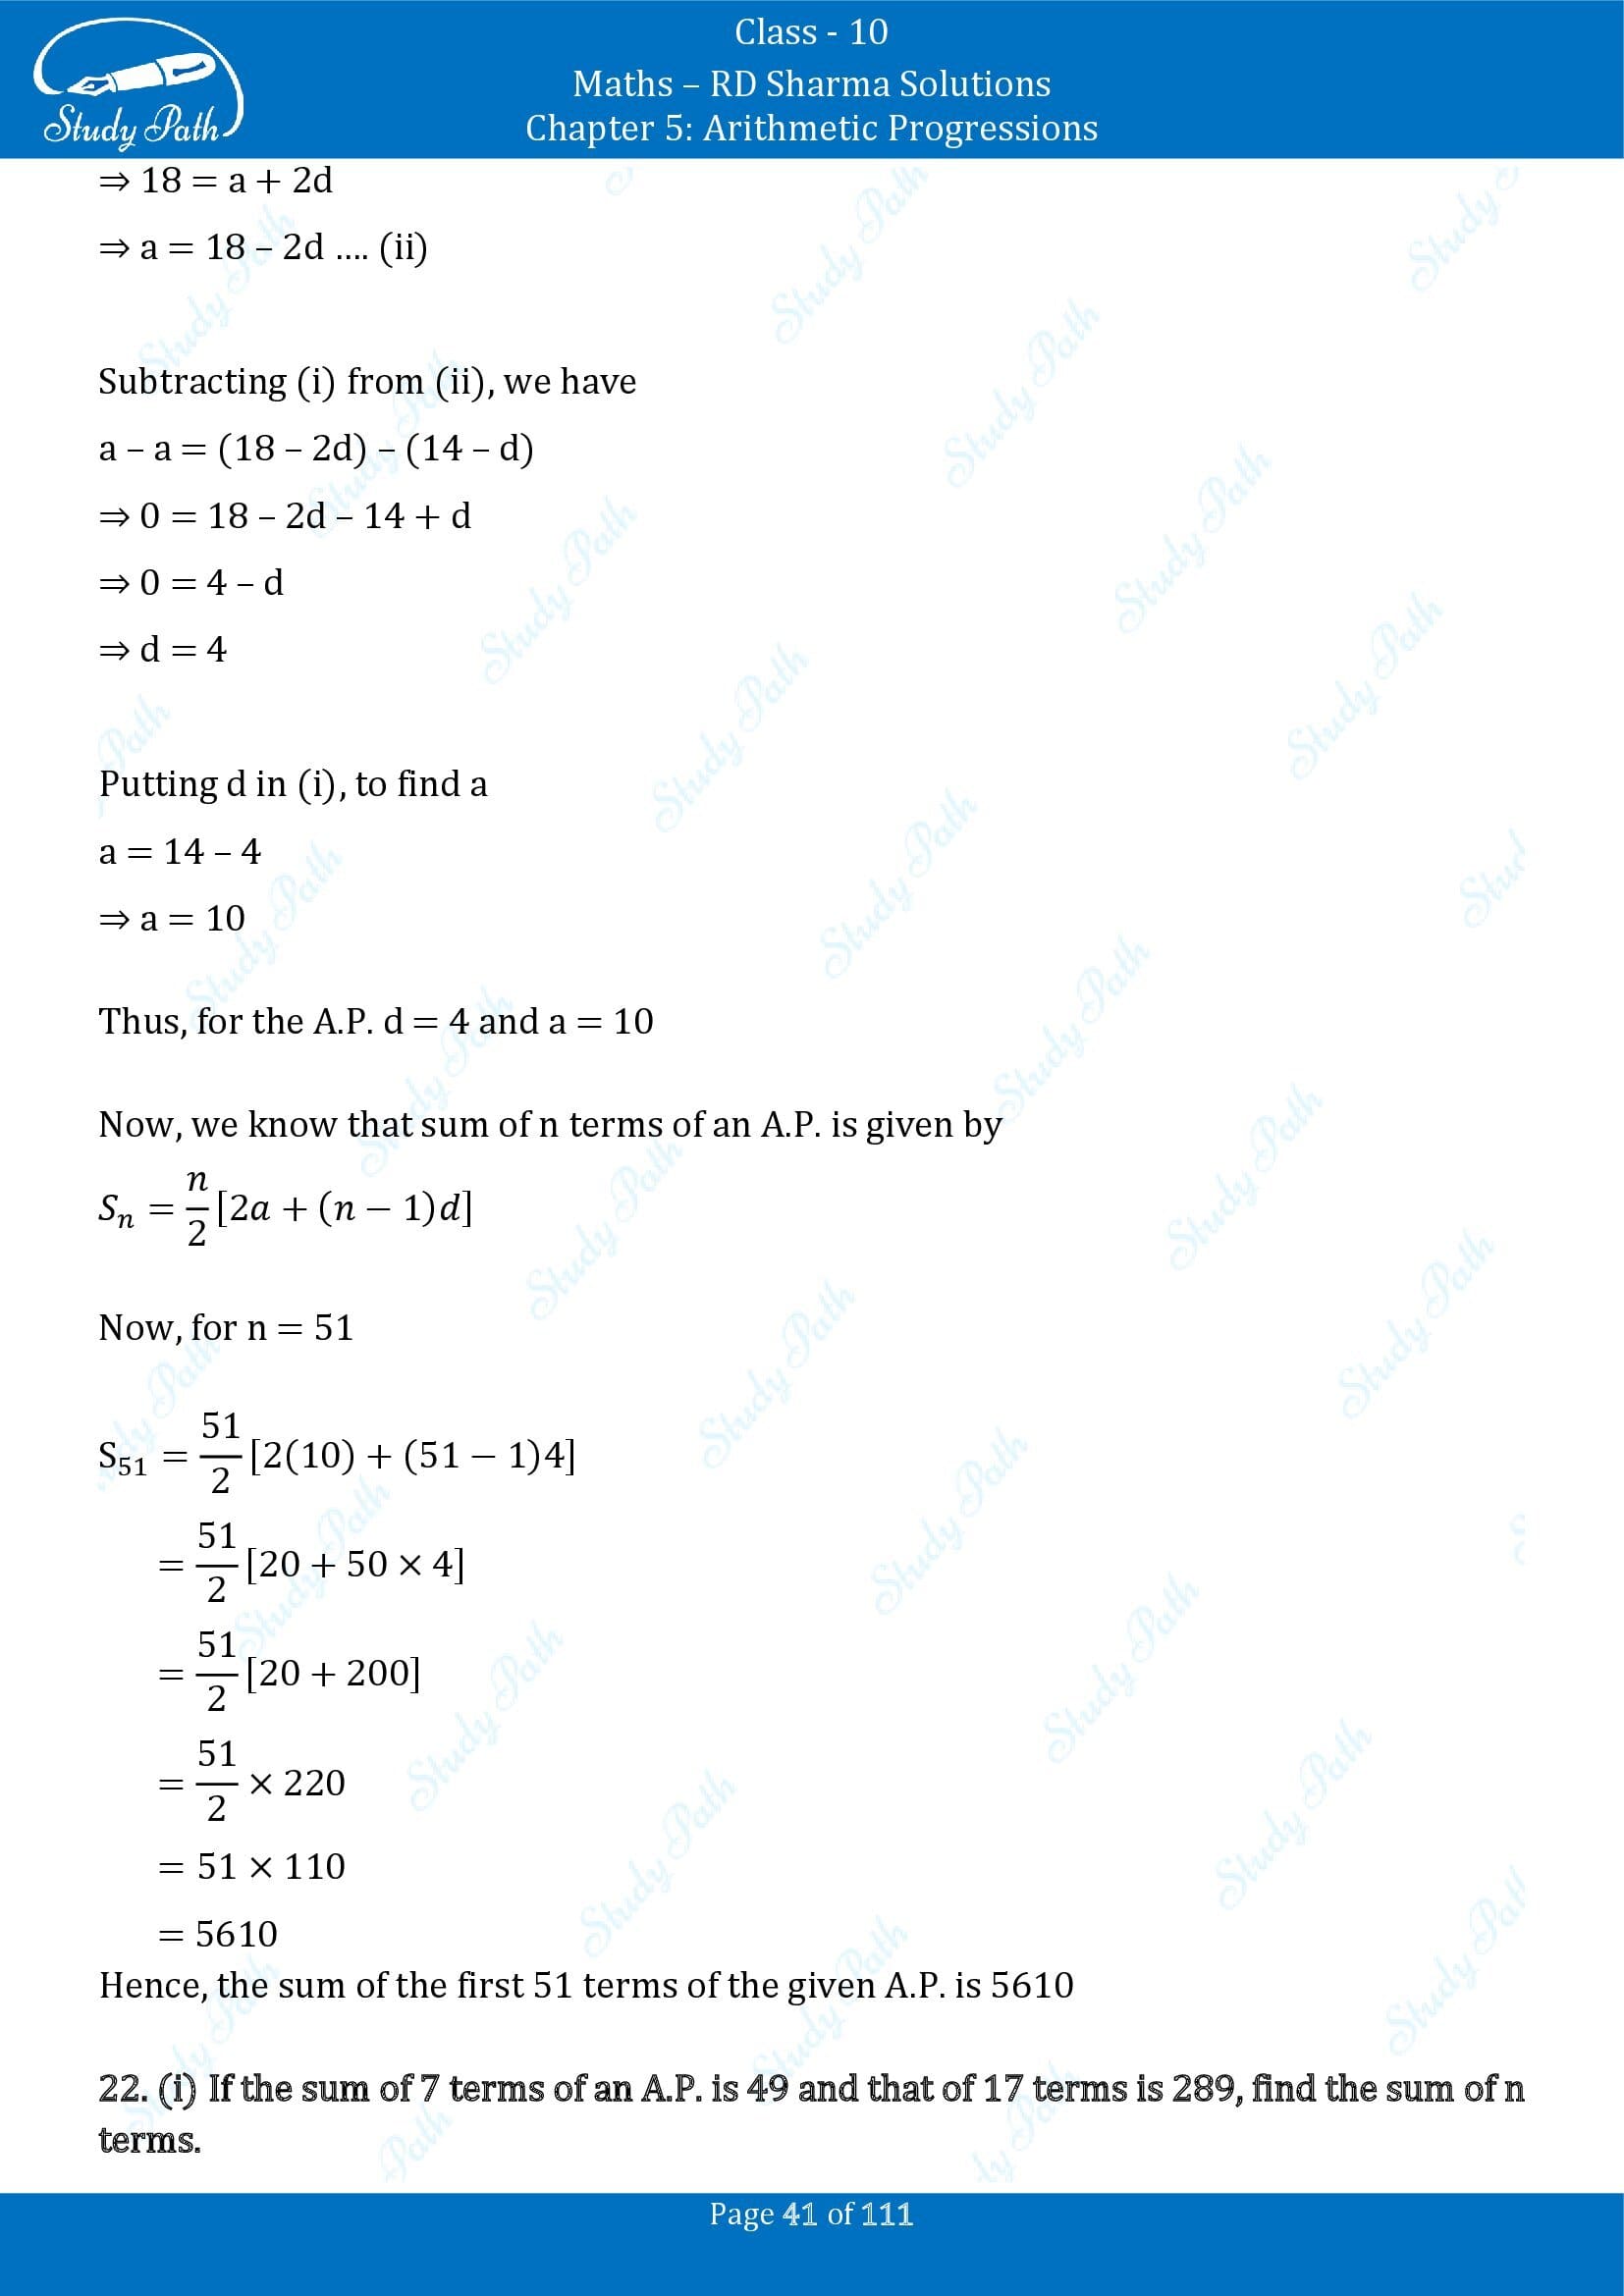 RD Sharma Solutions Class 10 Chapter 5 Arithmetic Progressions Exercise 5.6 00041